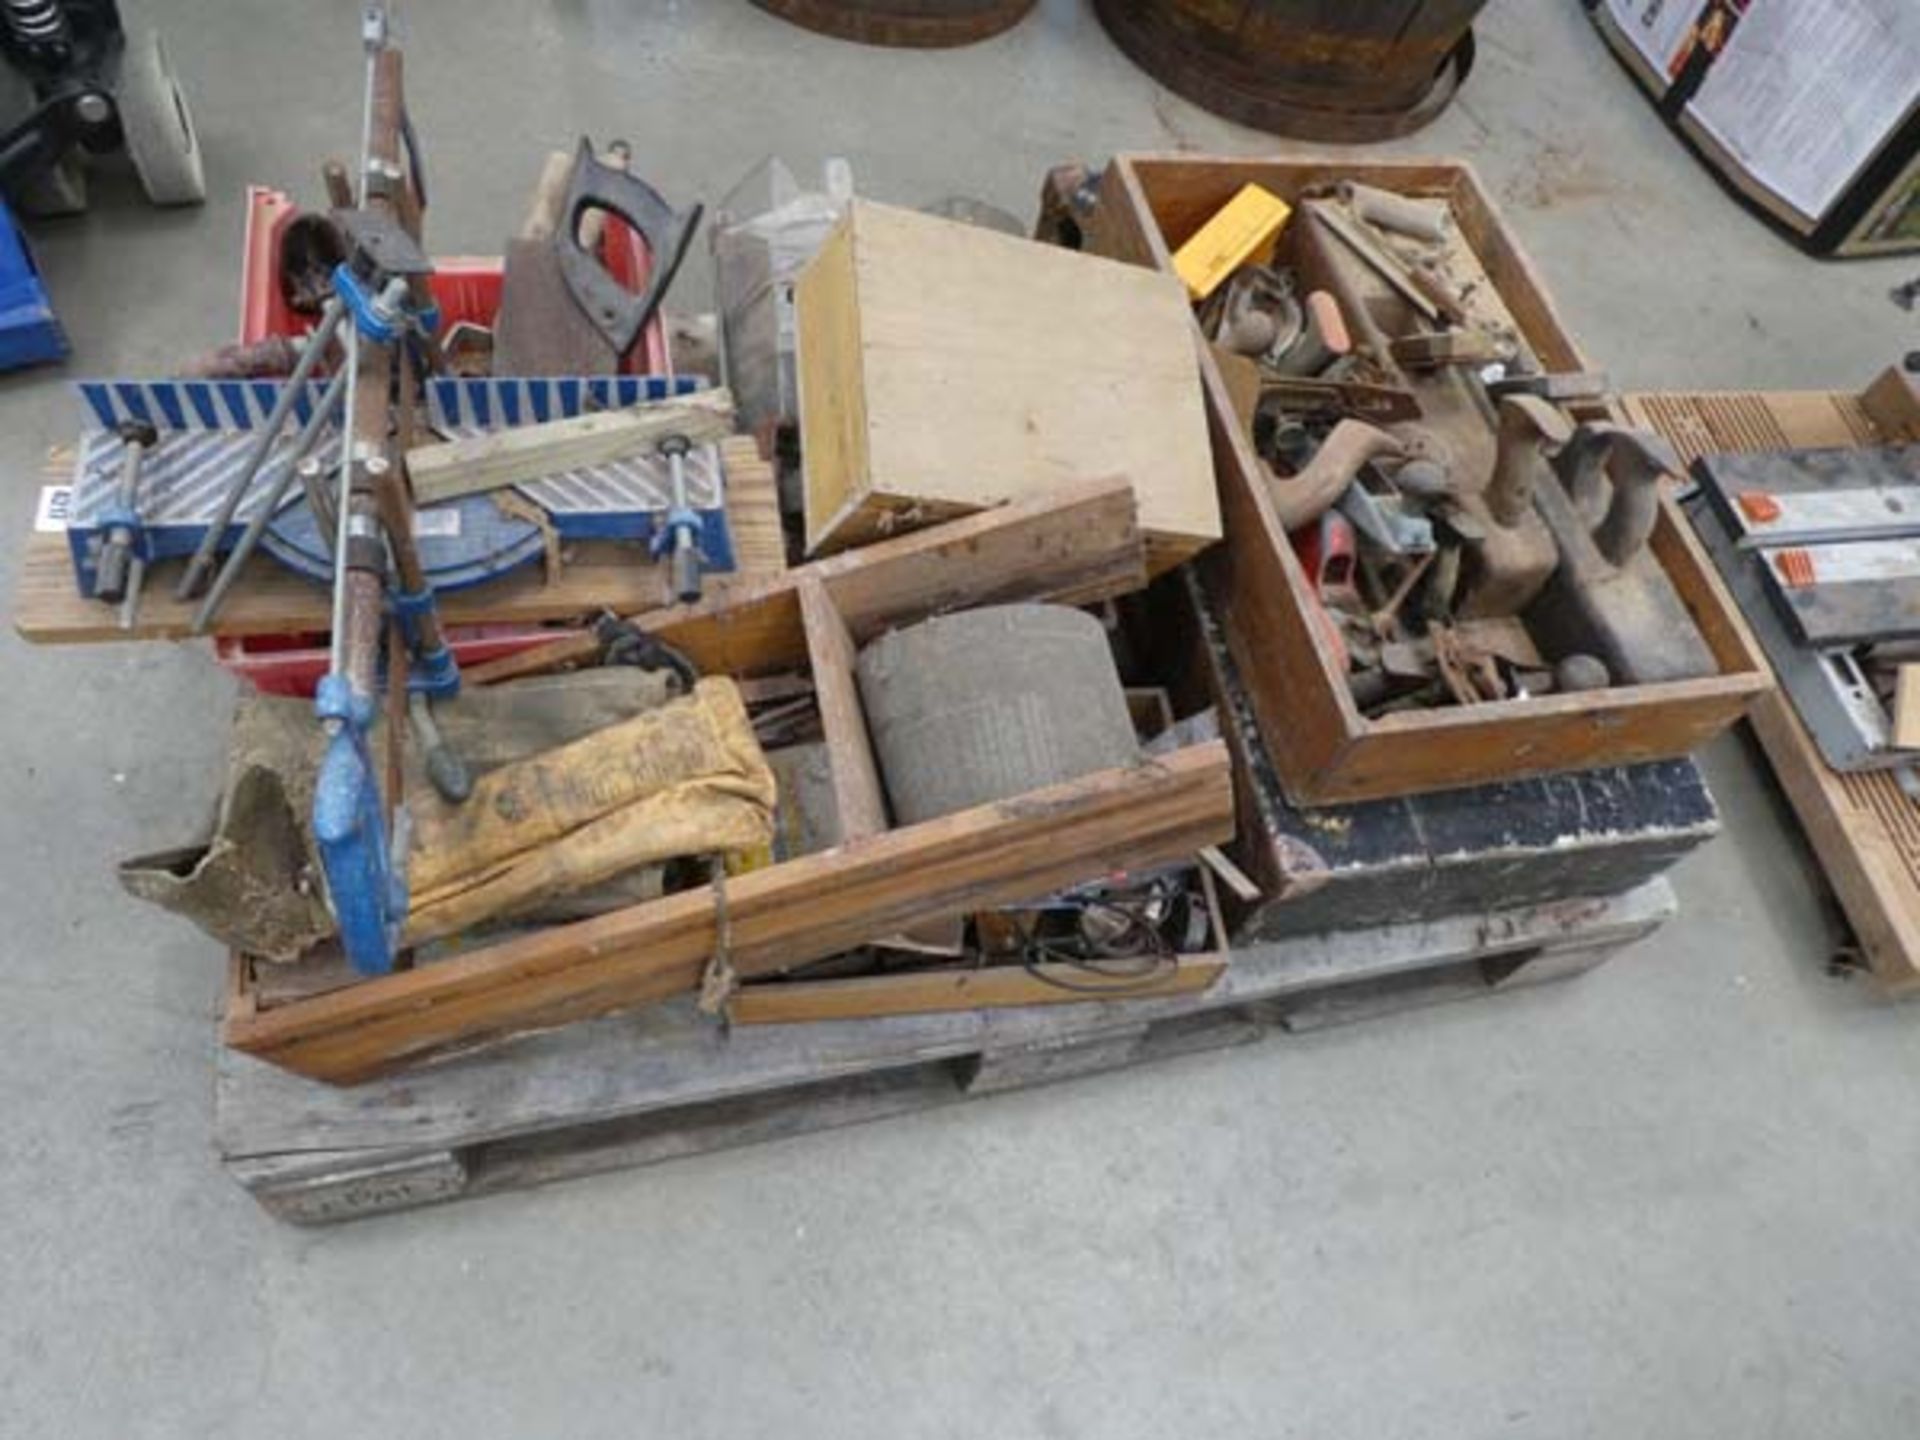 Pallet containing saws, hand planes, sandpaper, mitre saws, hand drills and various other tools